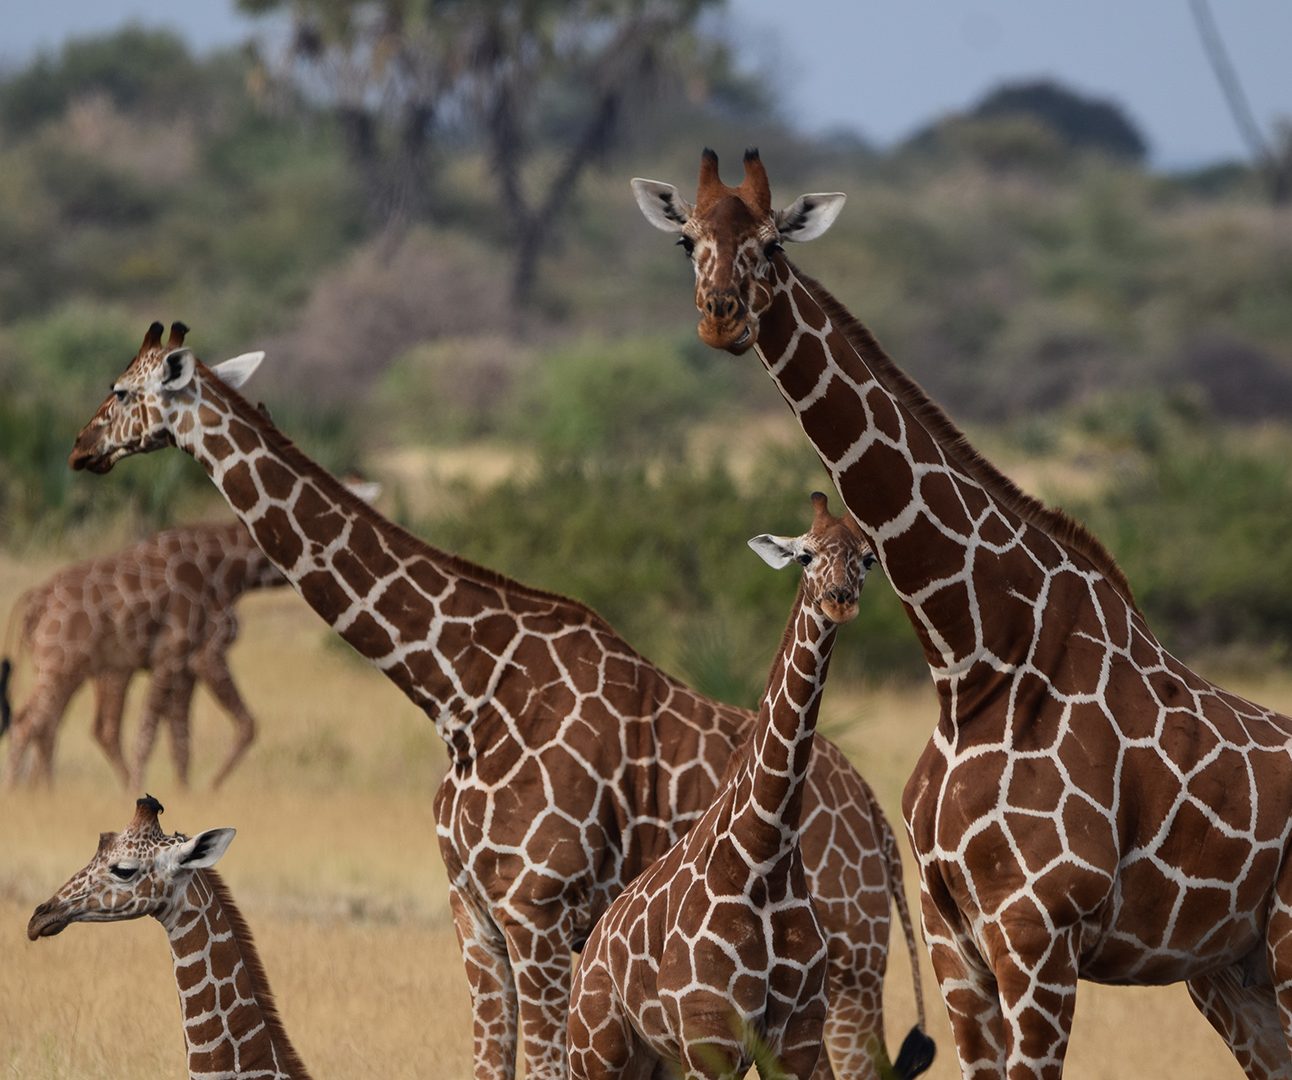 A family of adult and juvenile giraffe standing in a group